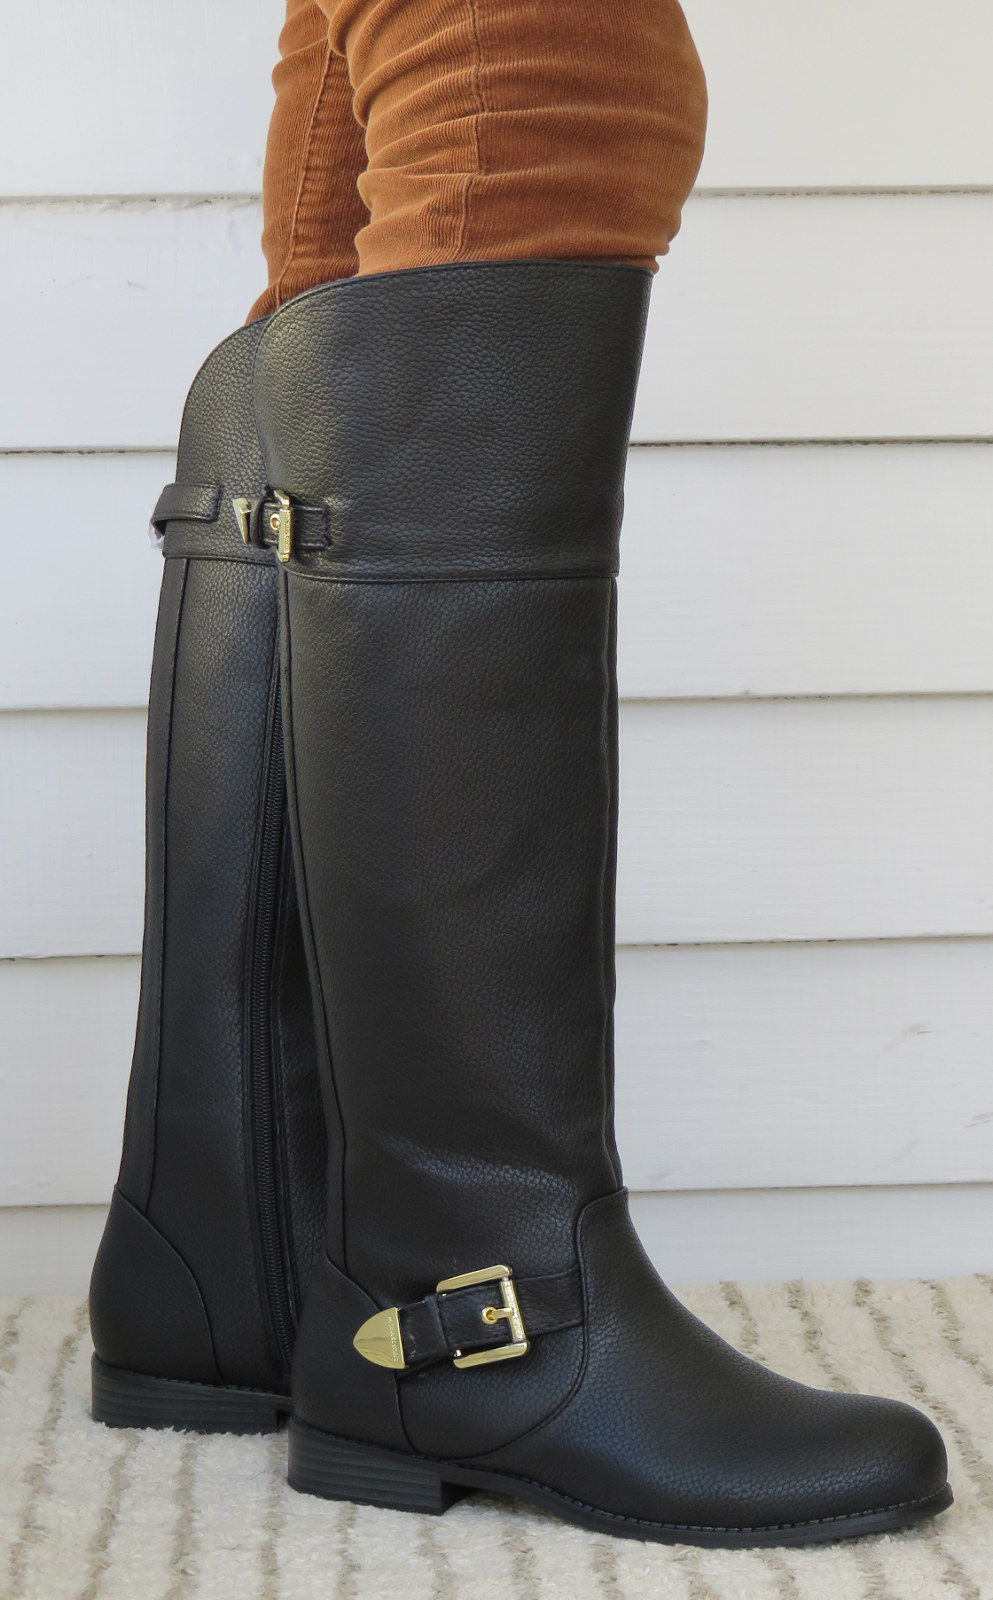 Howdy Slim! Riding Boots for Thin Calves: February 2016